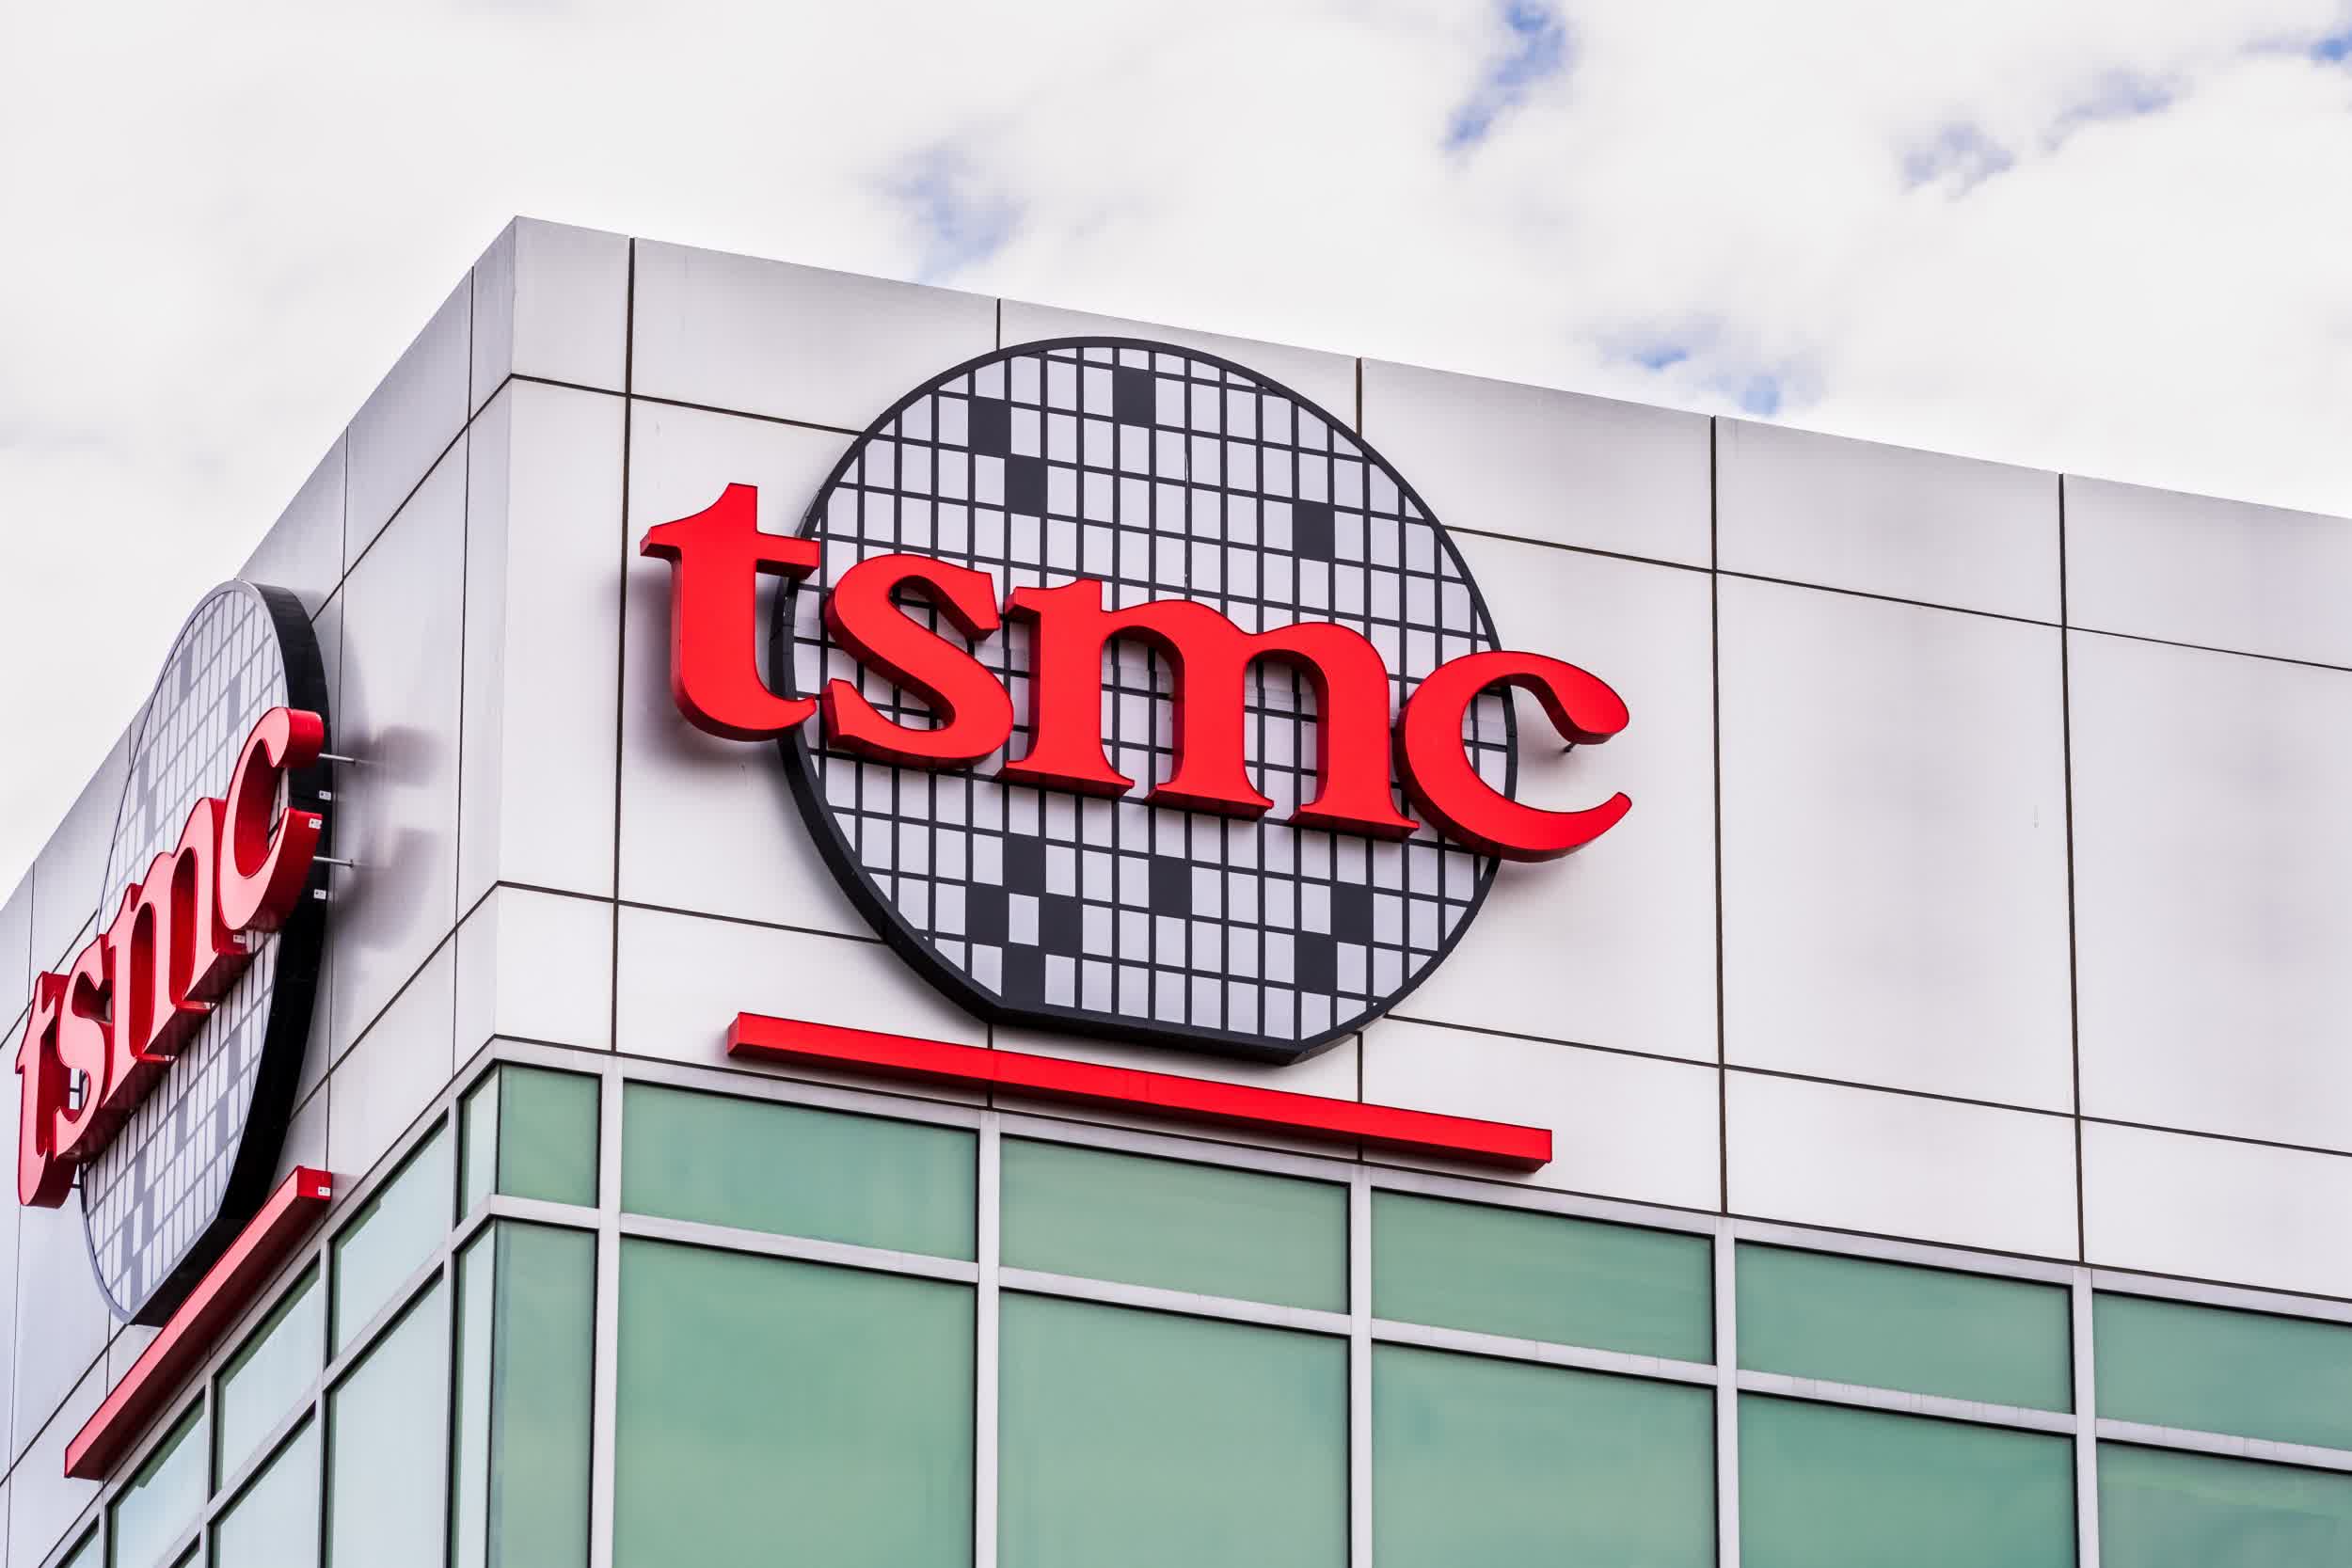 TSMC says consumer demand for smartphones, PCs and TVs is slowing